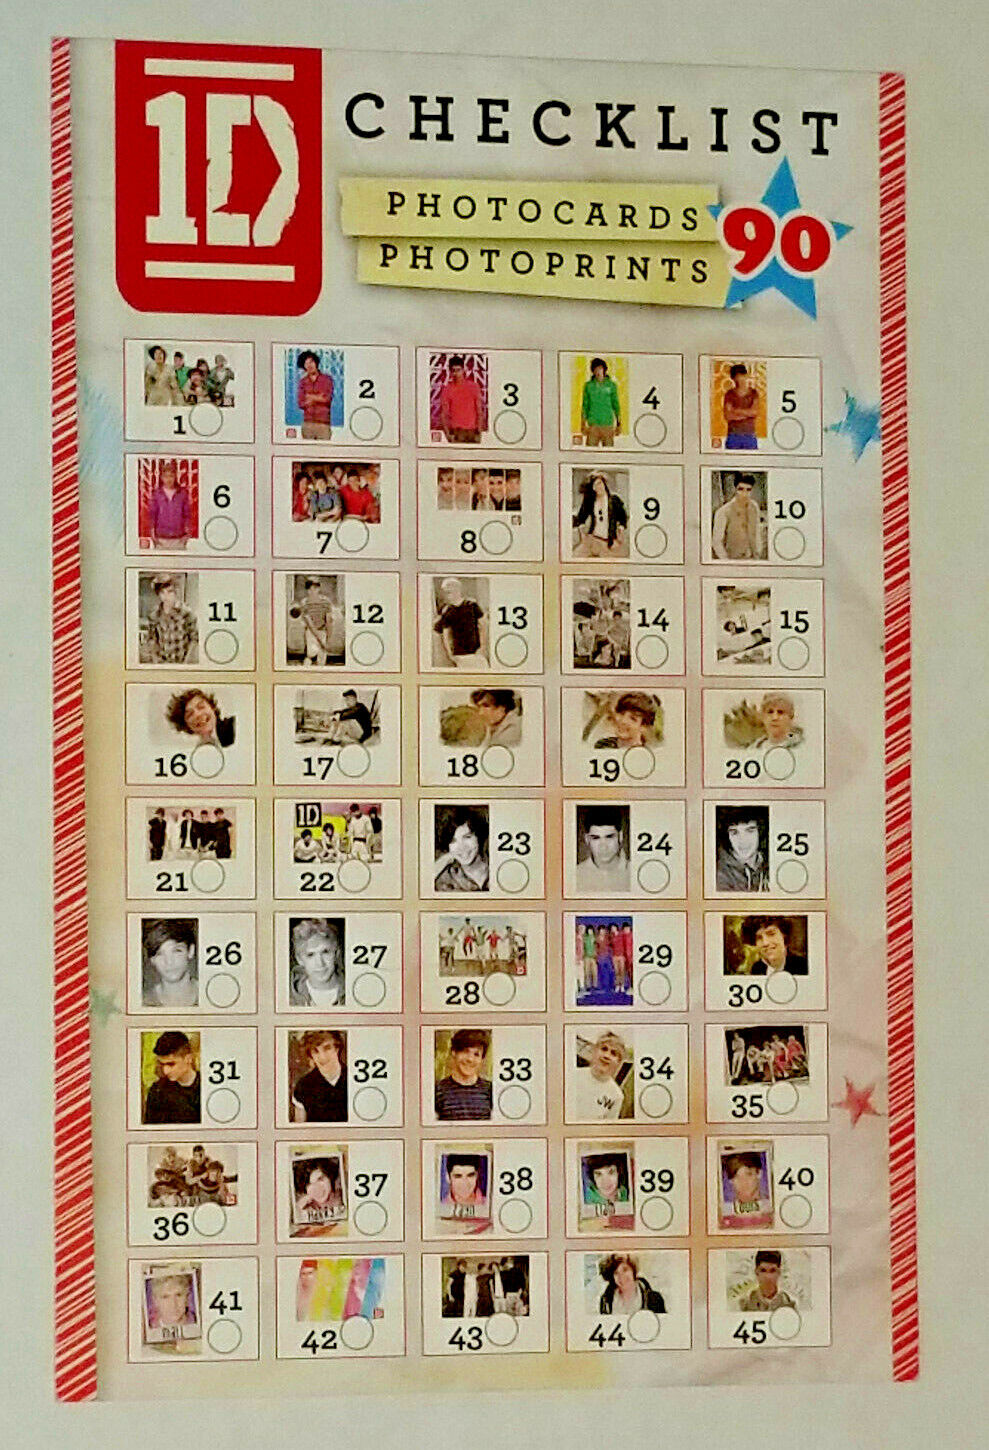 ONE DIRECTION 2012 Panini Global 4x6 Photocards / Photoprints - Checklist - 1D